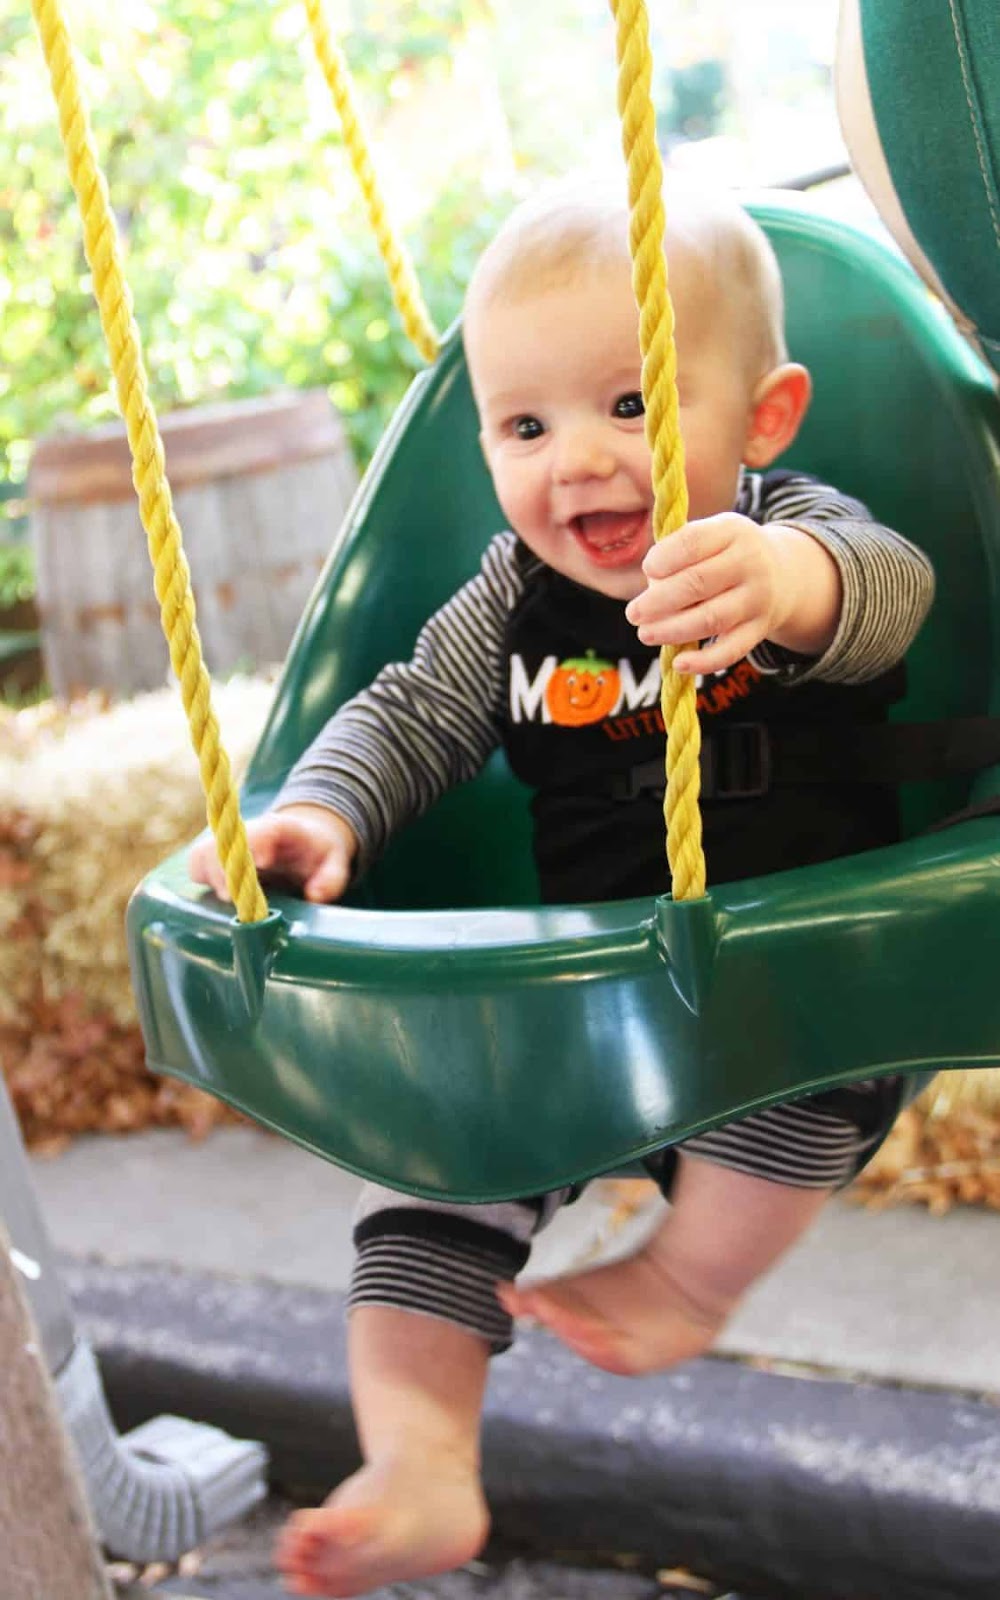 playing on the swings - outdoor activity for baby